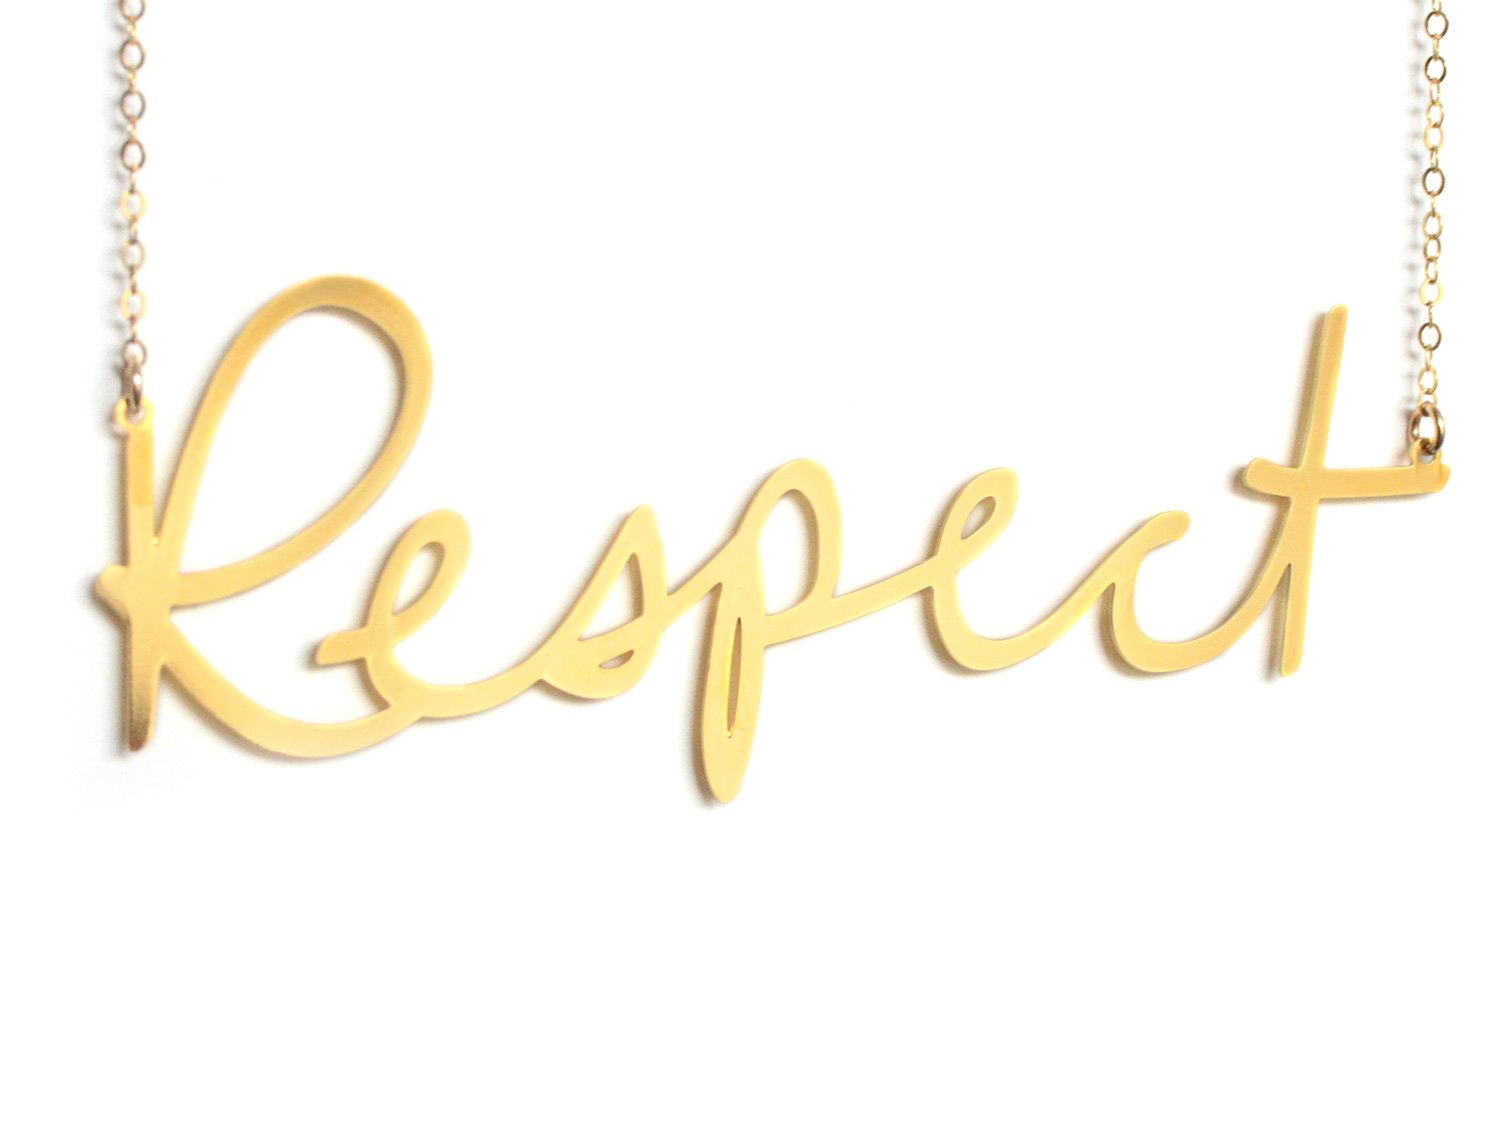 Respect - XX {{ product.type }} - Brevity Jewelry - Made in USA - Affordable gold and silver necklaces